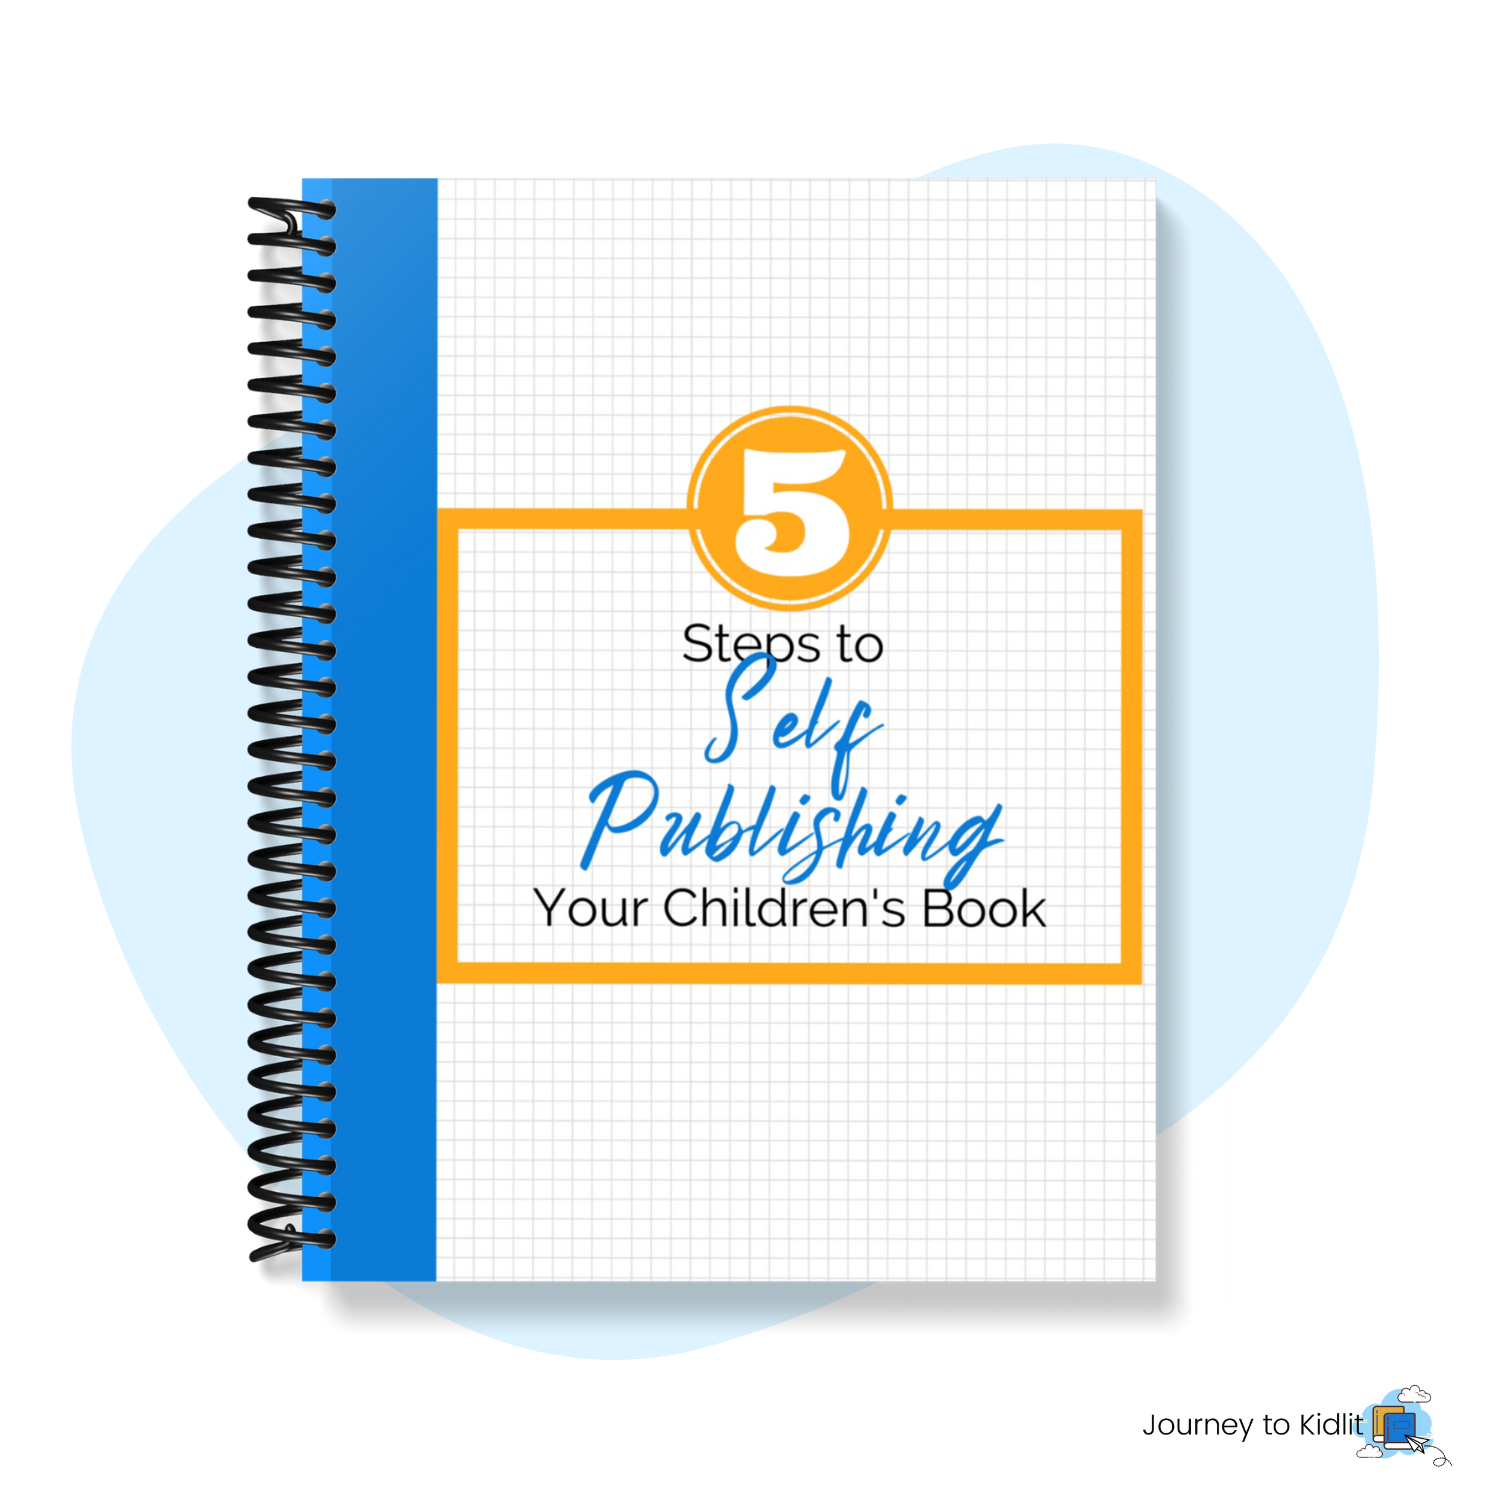 5 Steps to self-publish a children's book